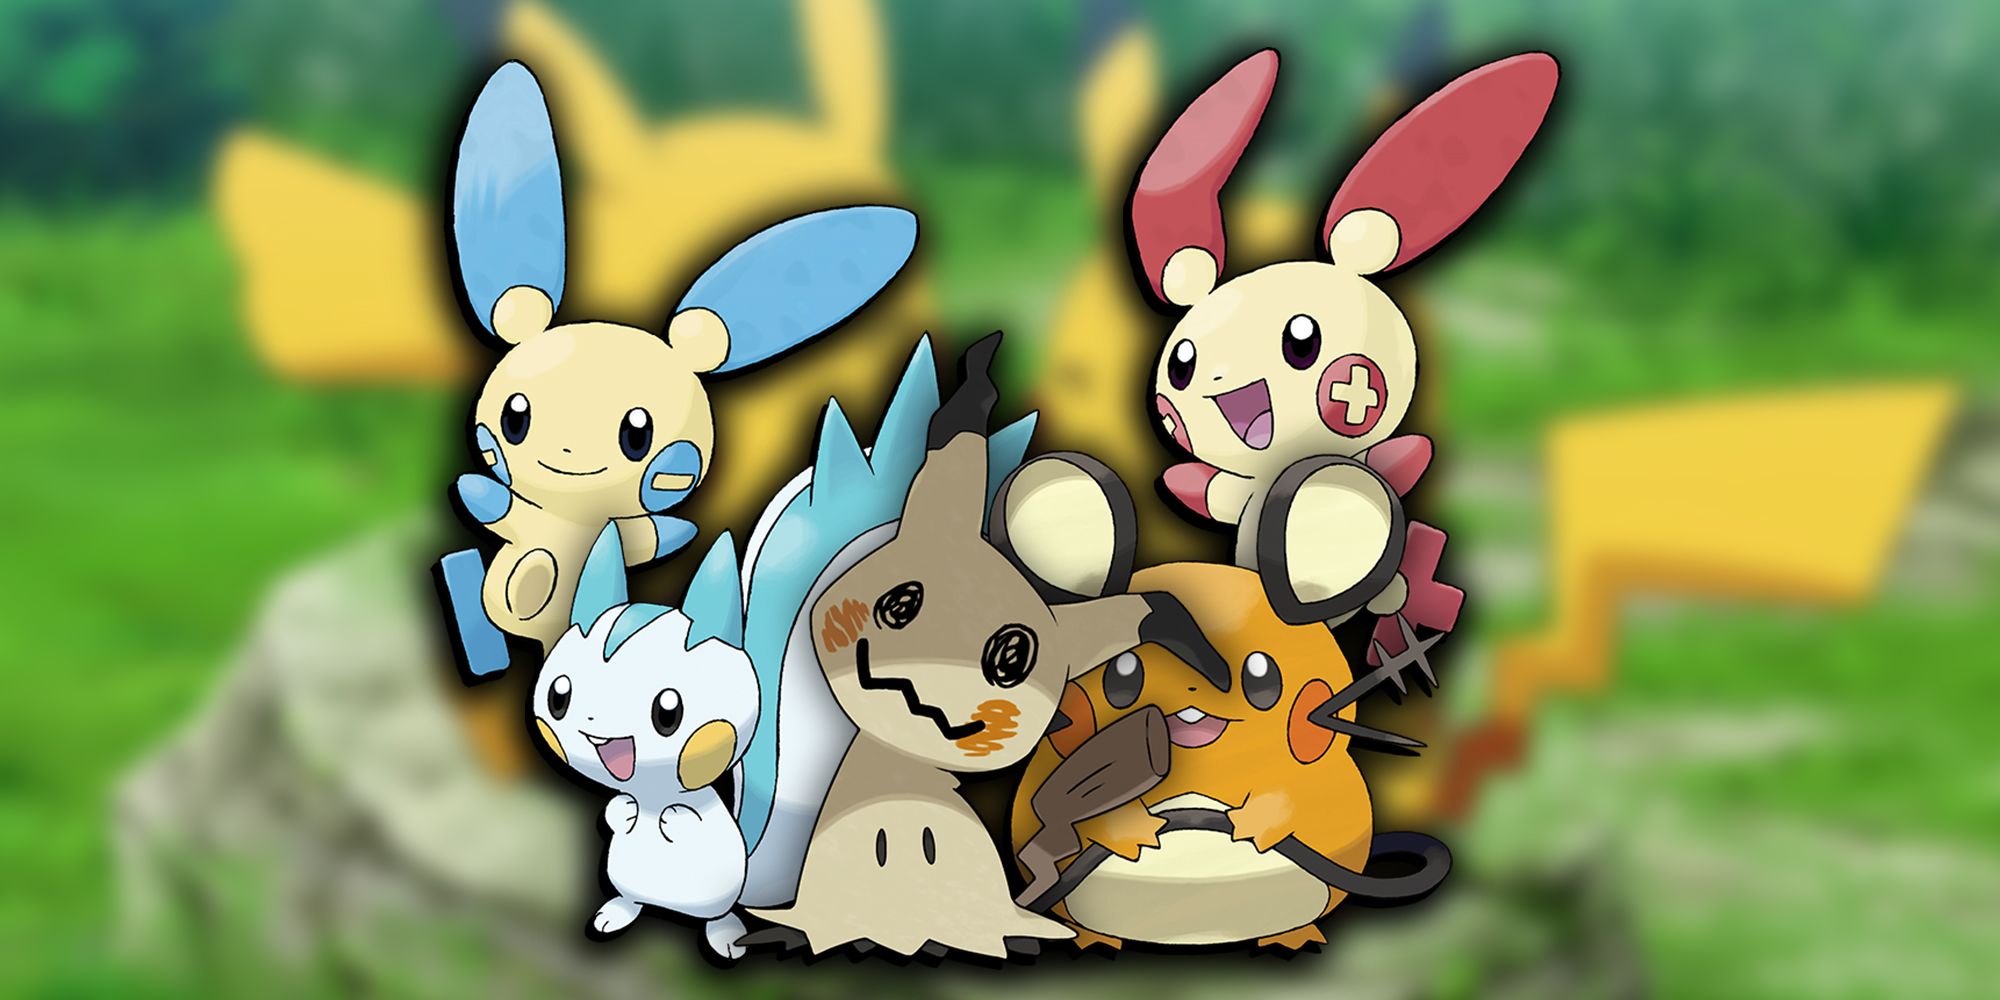 Pokemon - All The Pikachu-Like Pokemon PNGs Overlaid On Image Of Two Pikachus Eating Together